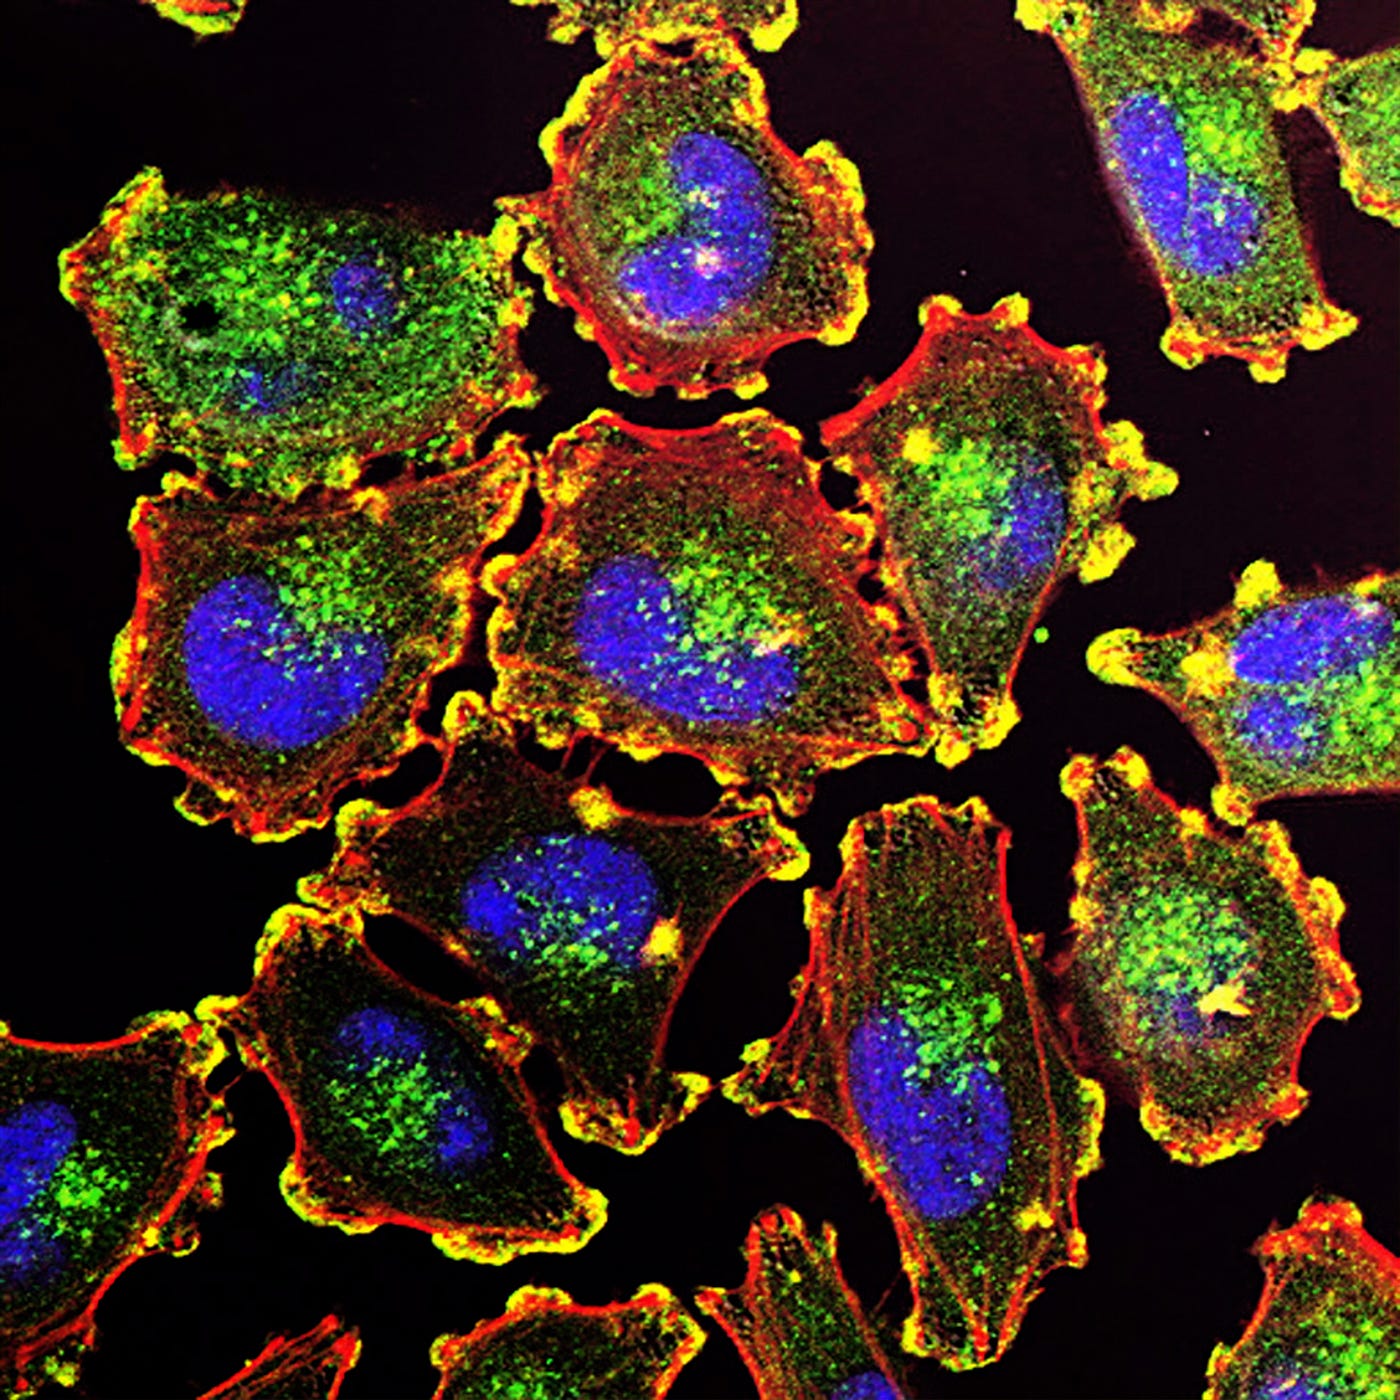 Cancer cells under a microscope. The cells are depicted in vibrant green purple, and red (with a black background). Increased consumption of minimally processed and fresh foods appeared to be associated with reduced overall risk for cancer and risk for specific cancers.